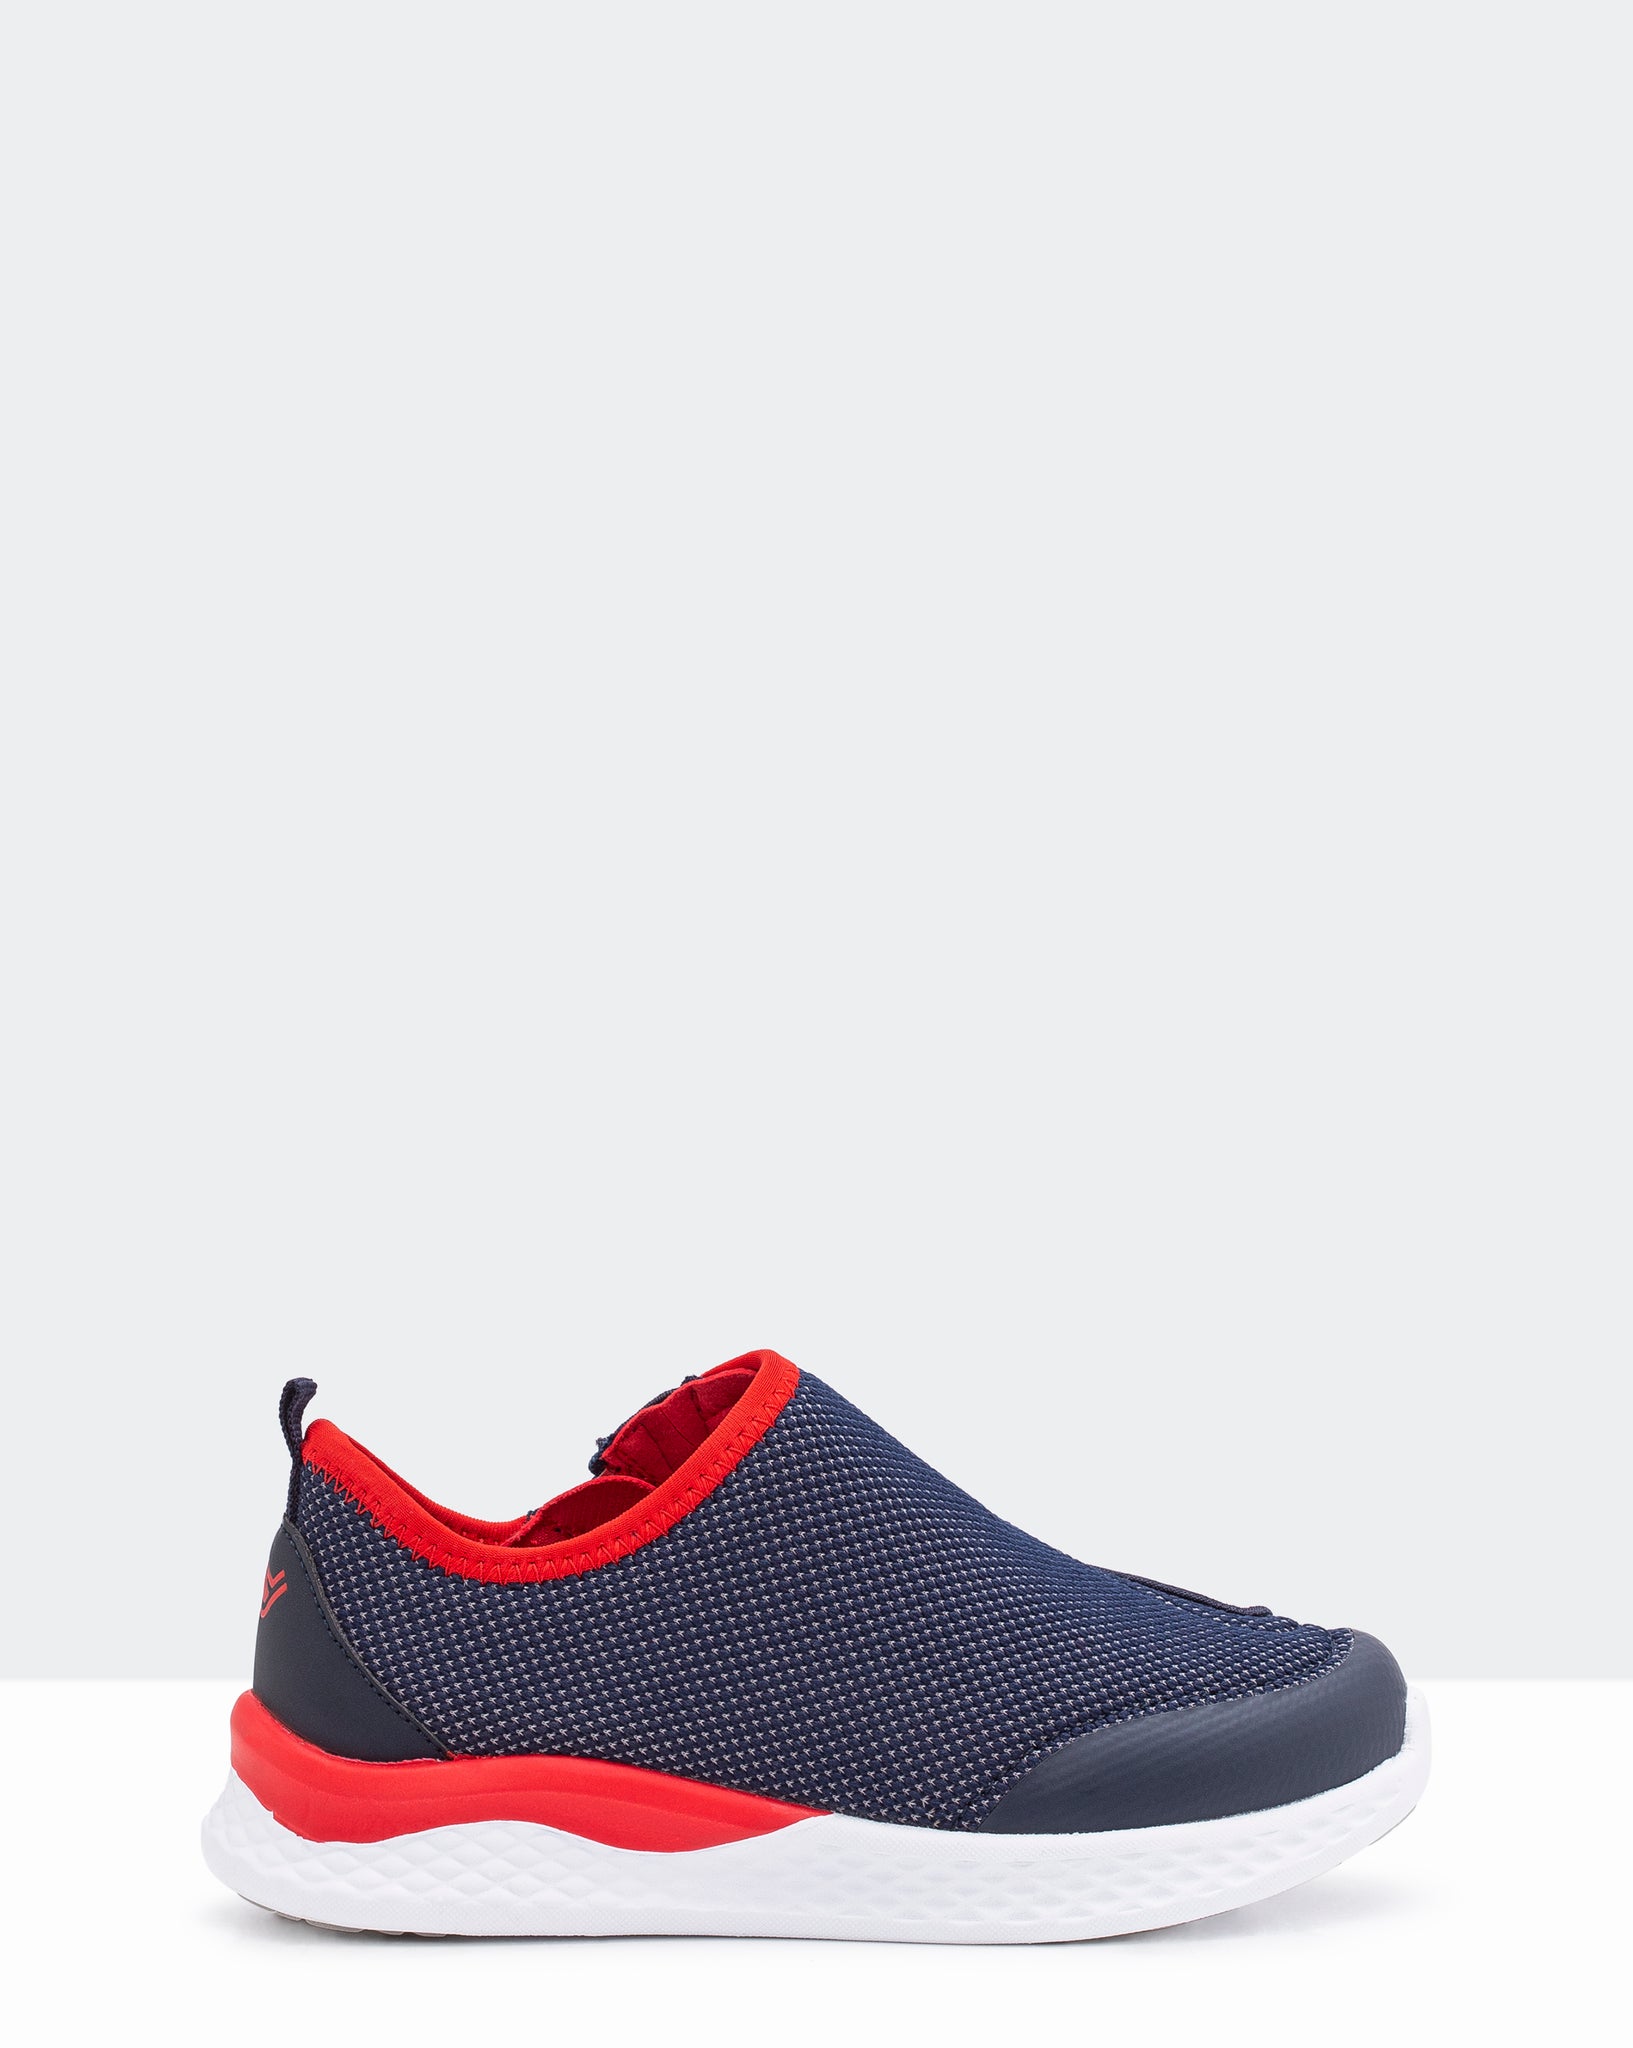 Friendly Force (Kids) - Navy/ Red